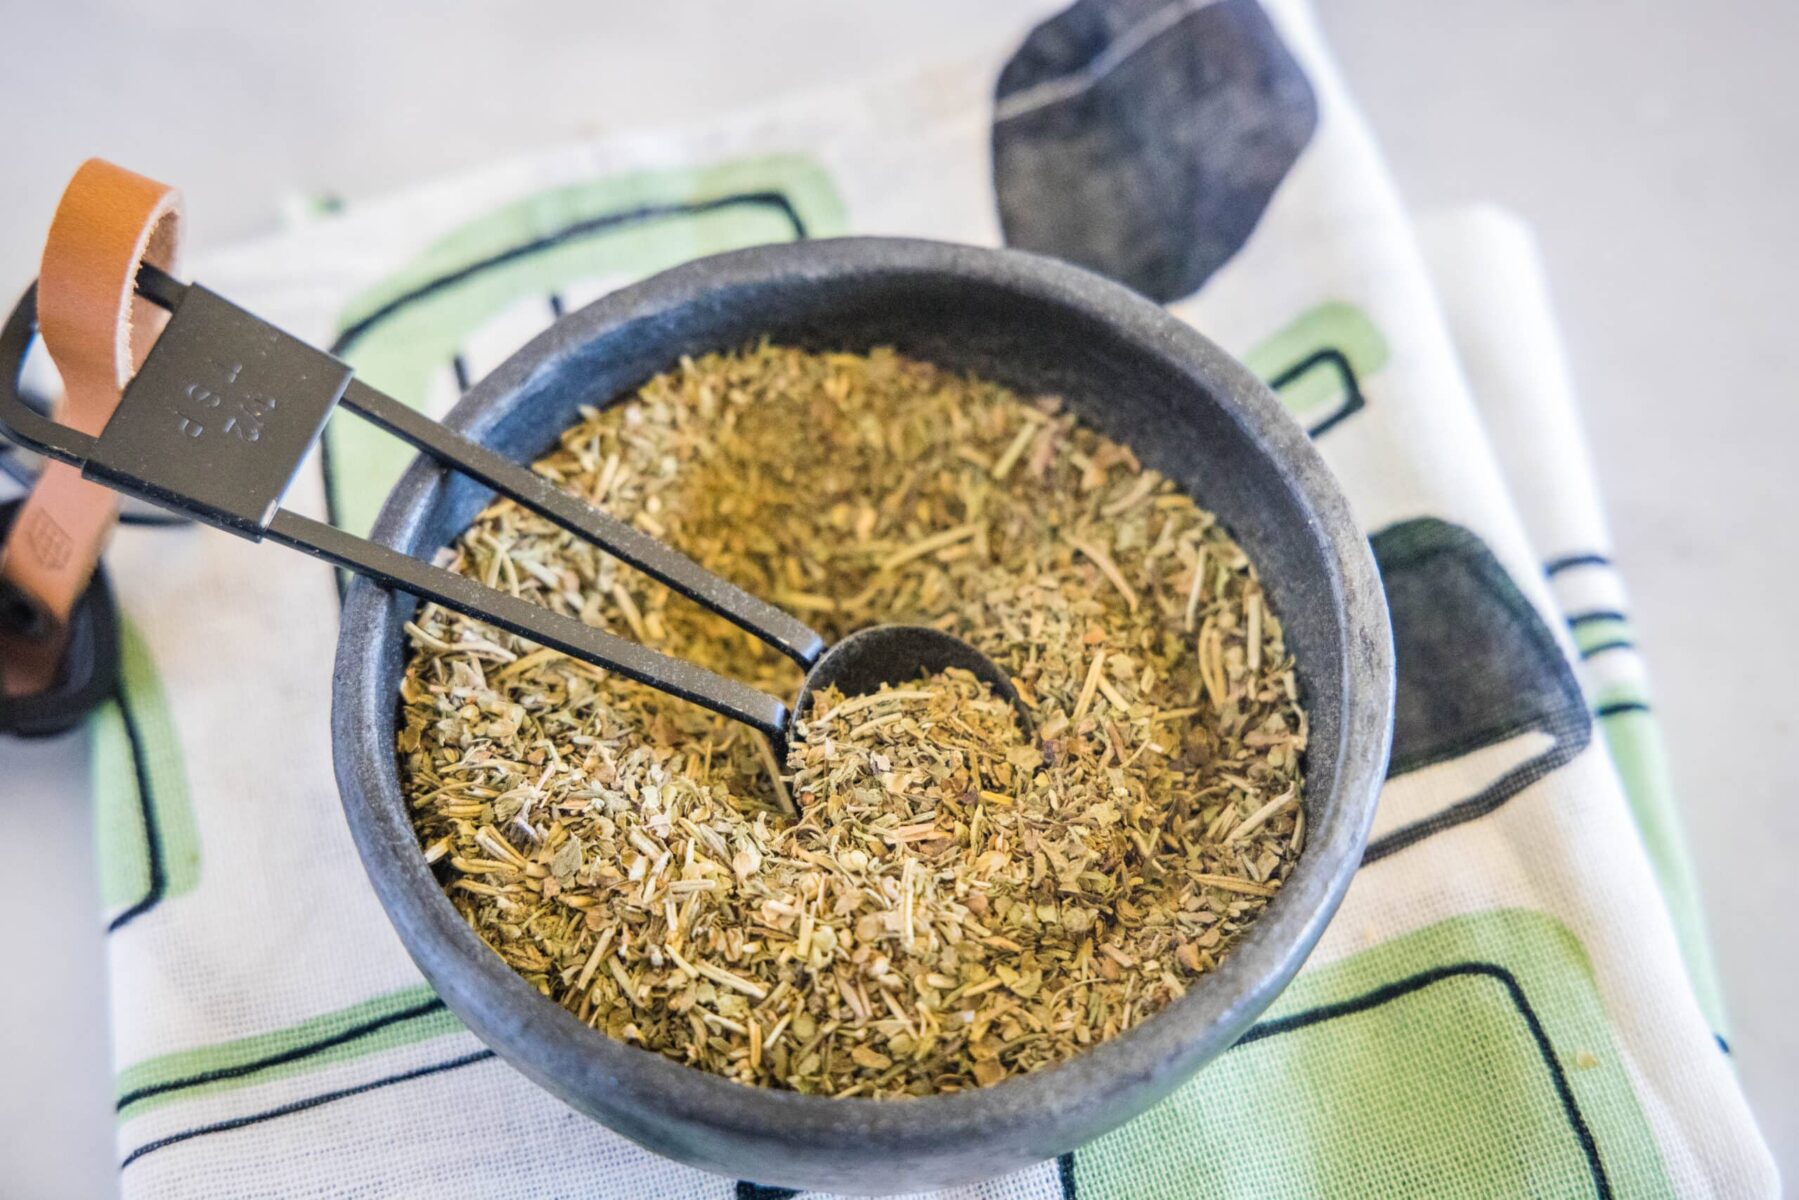 Overhead view of a bowl of Italian seasoning with a spoon in it, on top of a kitchen towel